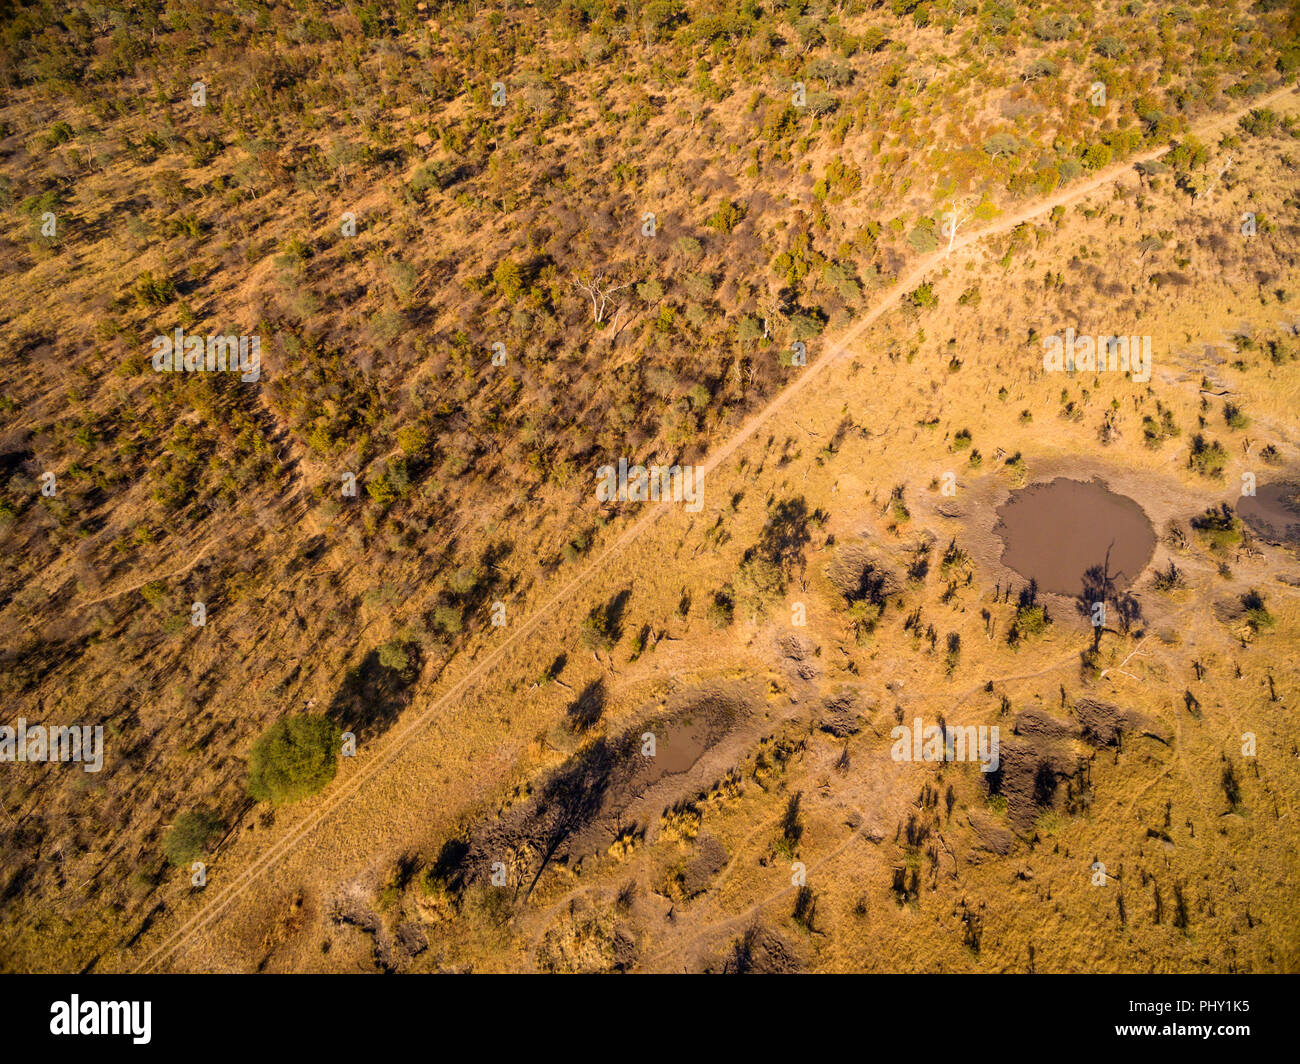 The border of Hwange national park is seen from the air. Stock Photo